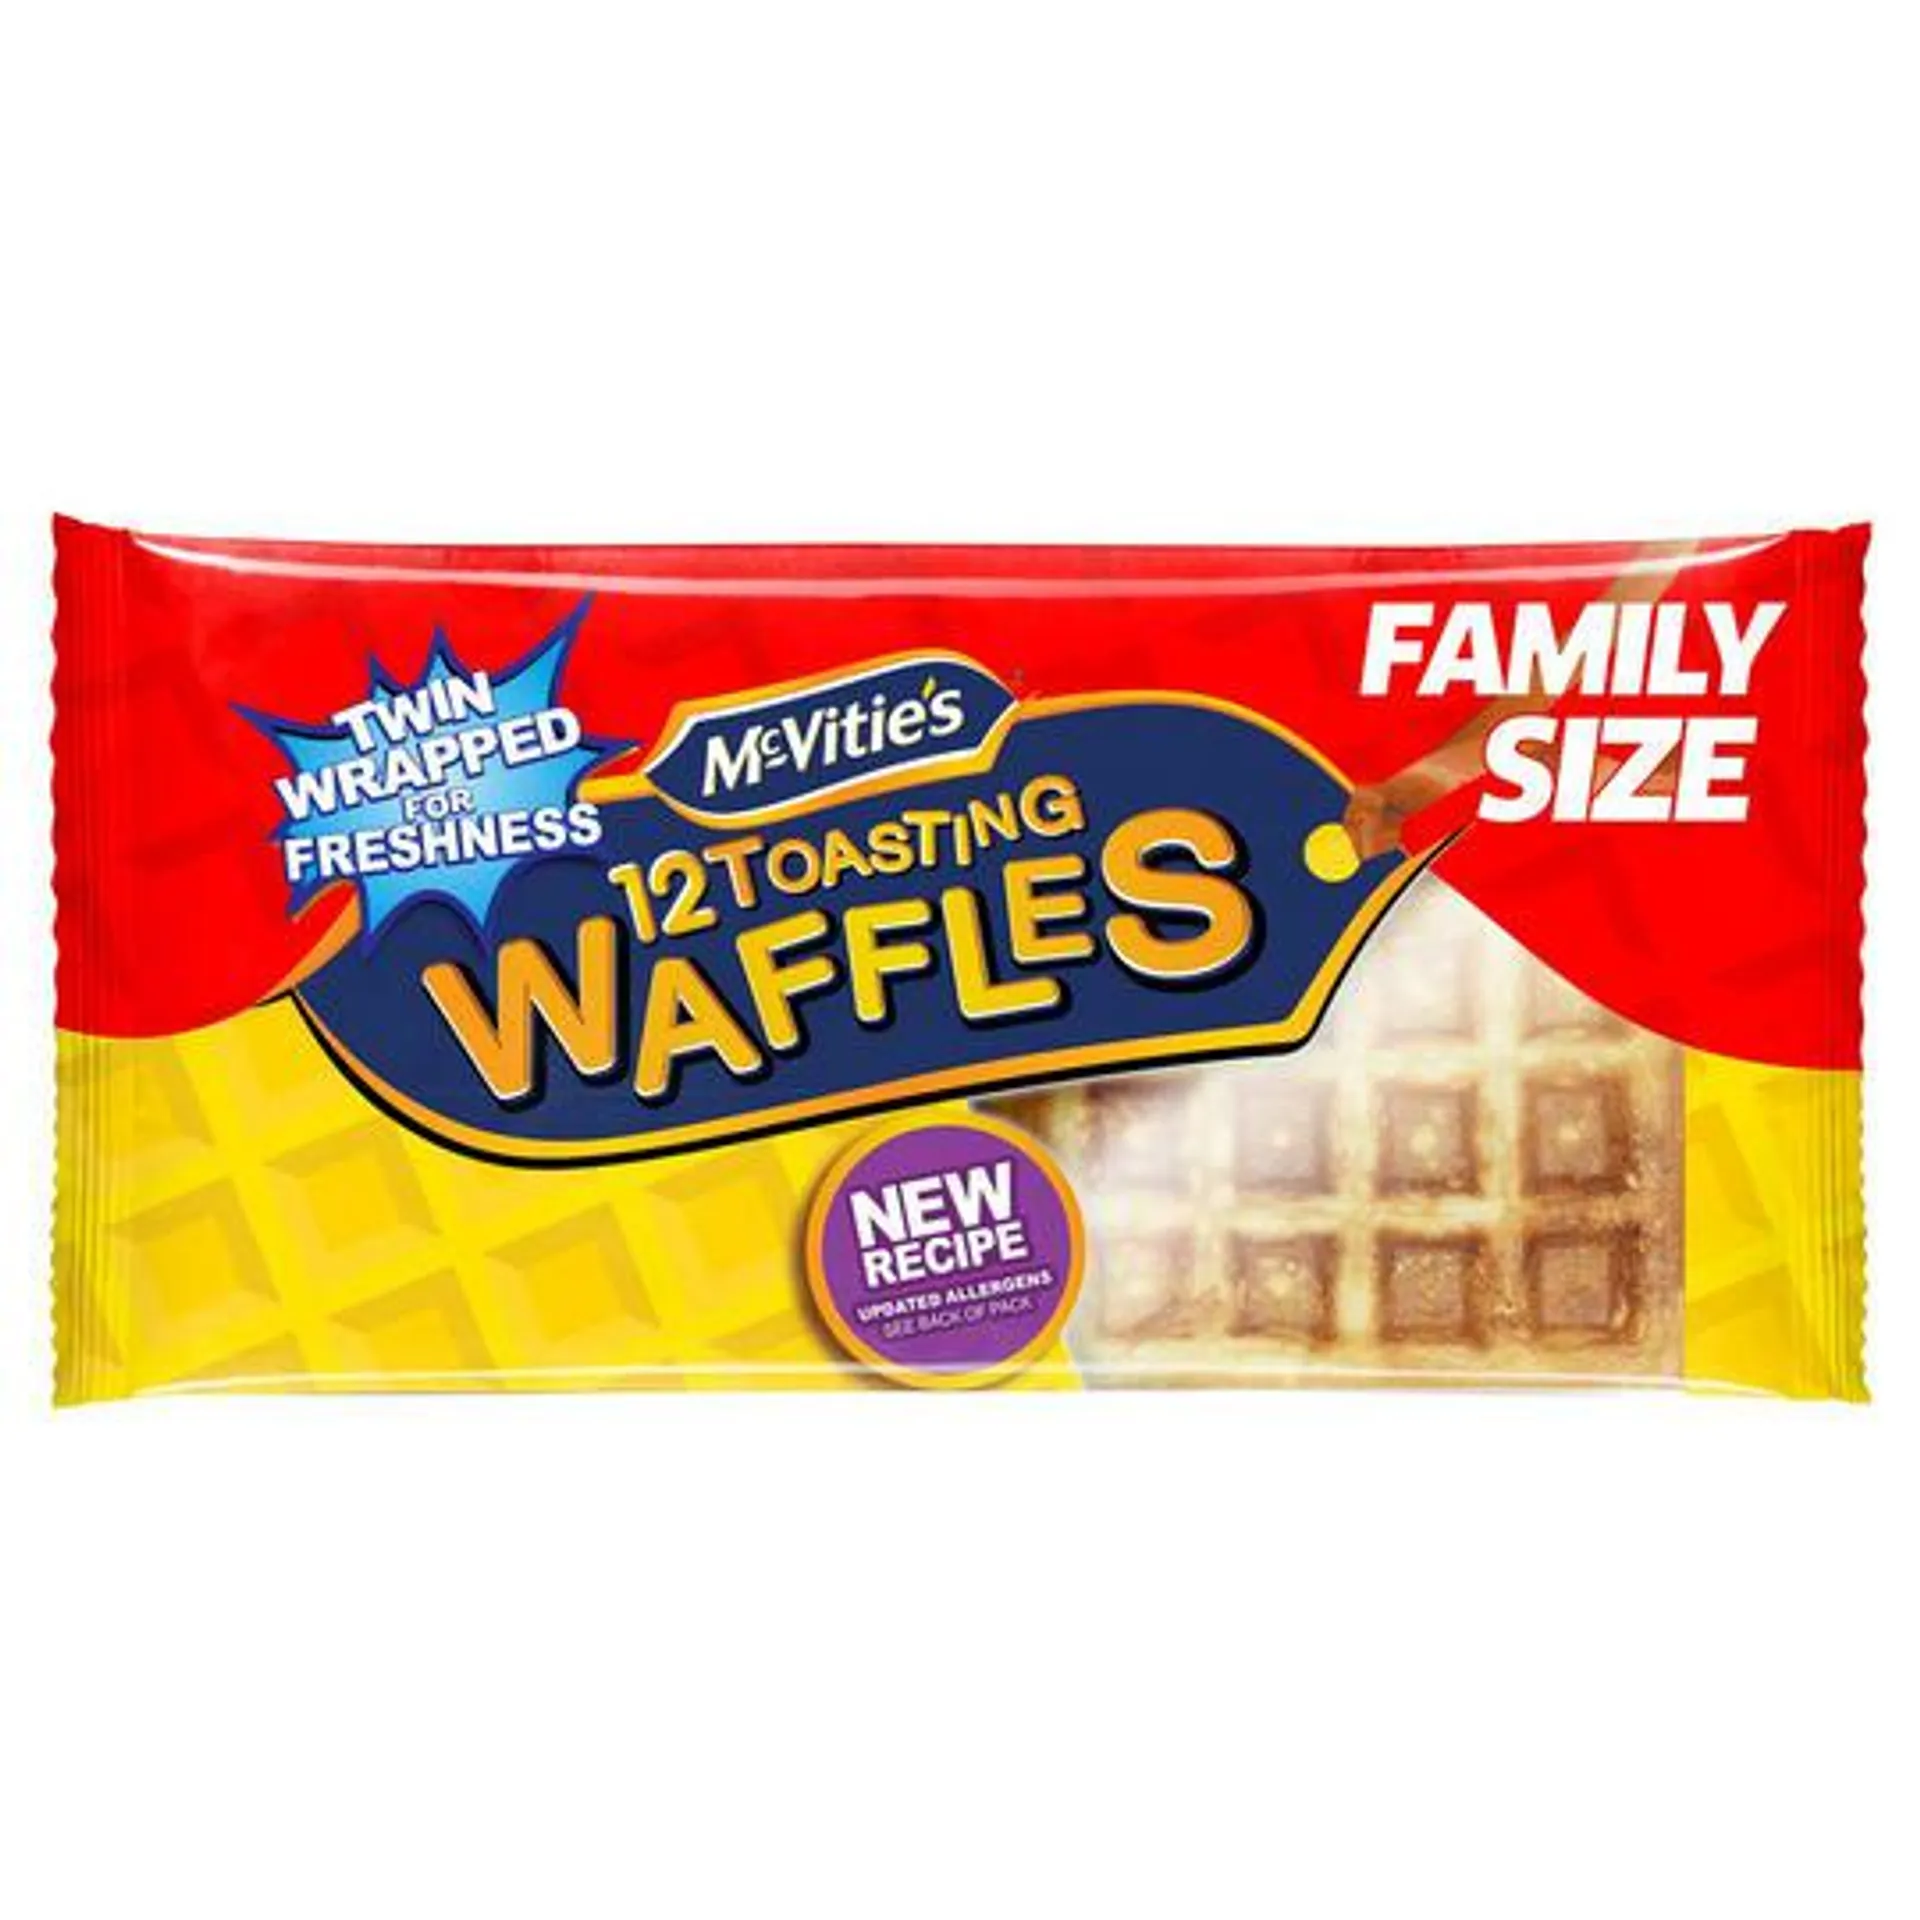 McVitie's 12 Toasting Waffles Family Size 300g